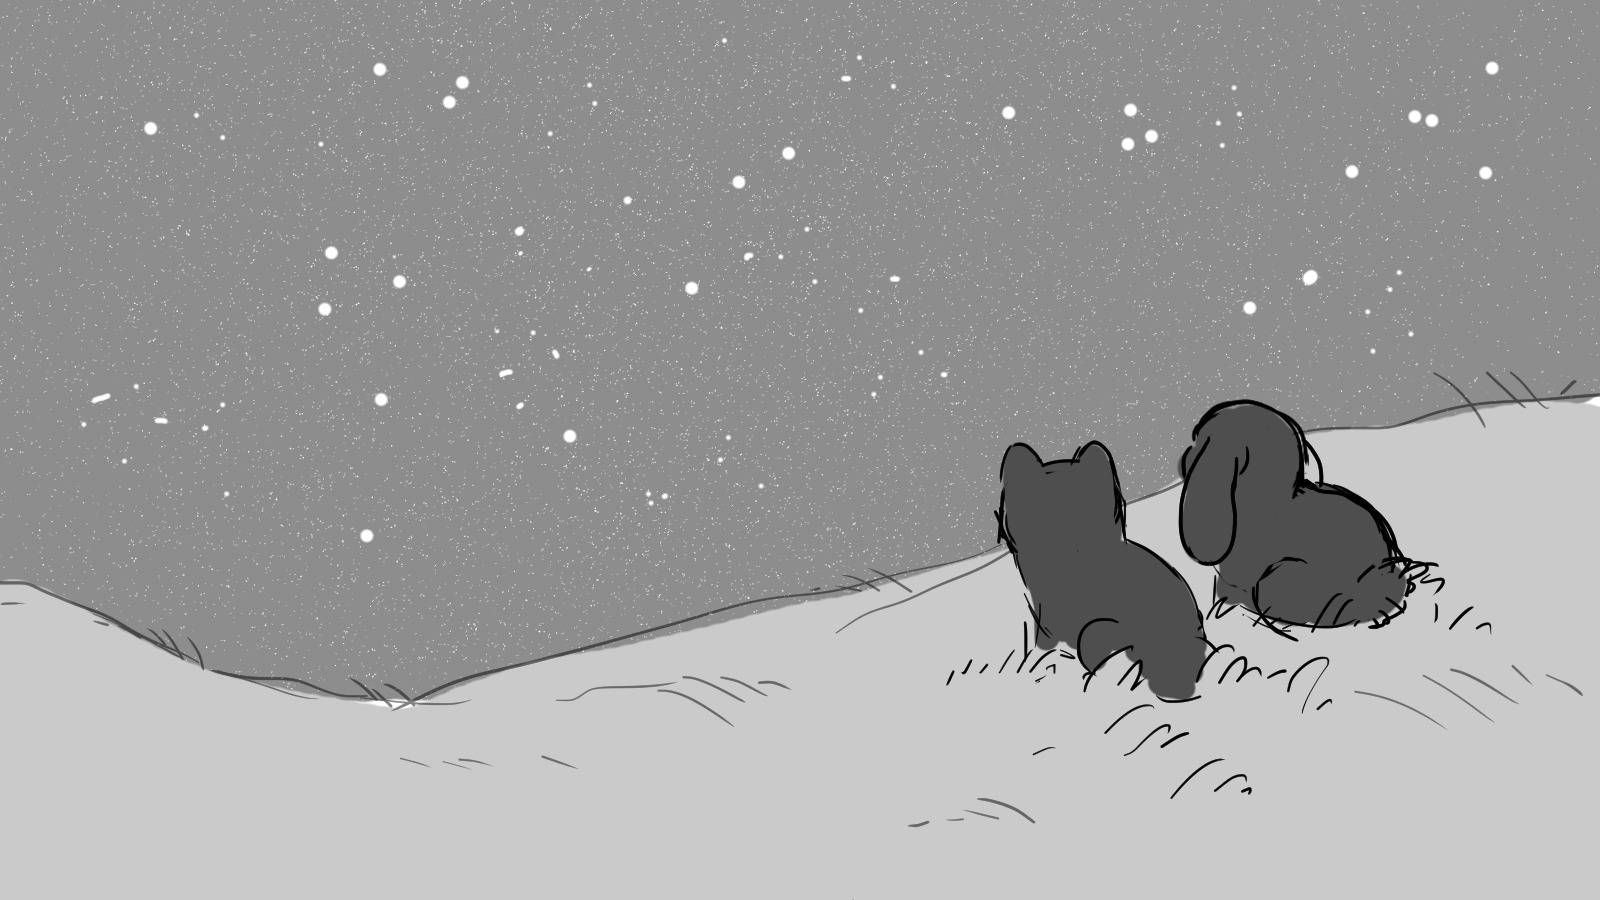 Bo depicted sitting on a grassy hill at night, staring at the stars with Nadir